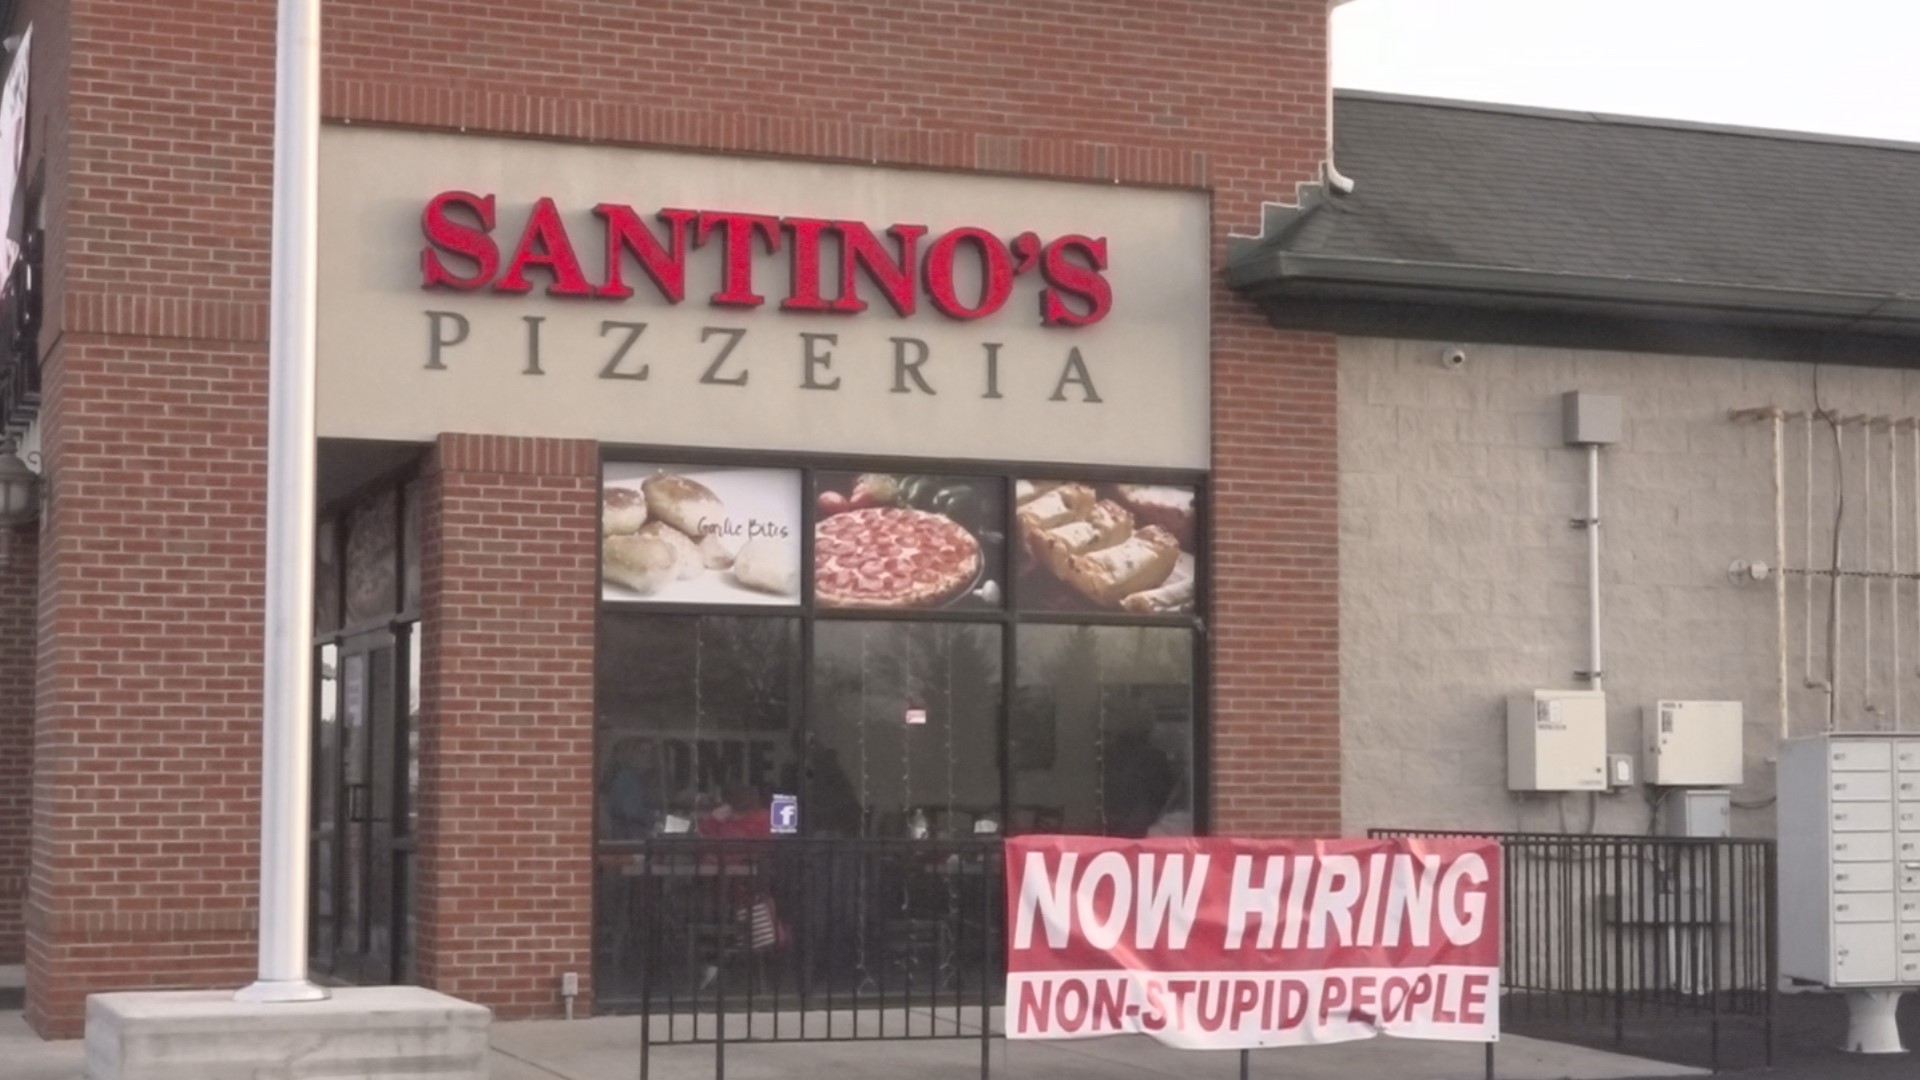 Santino’s Pizzeria manager, Heather Stockton says the shop put up two signs reading “Now Hiring Non-Stupid People,” a few months ago.